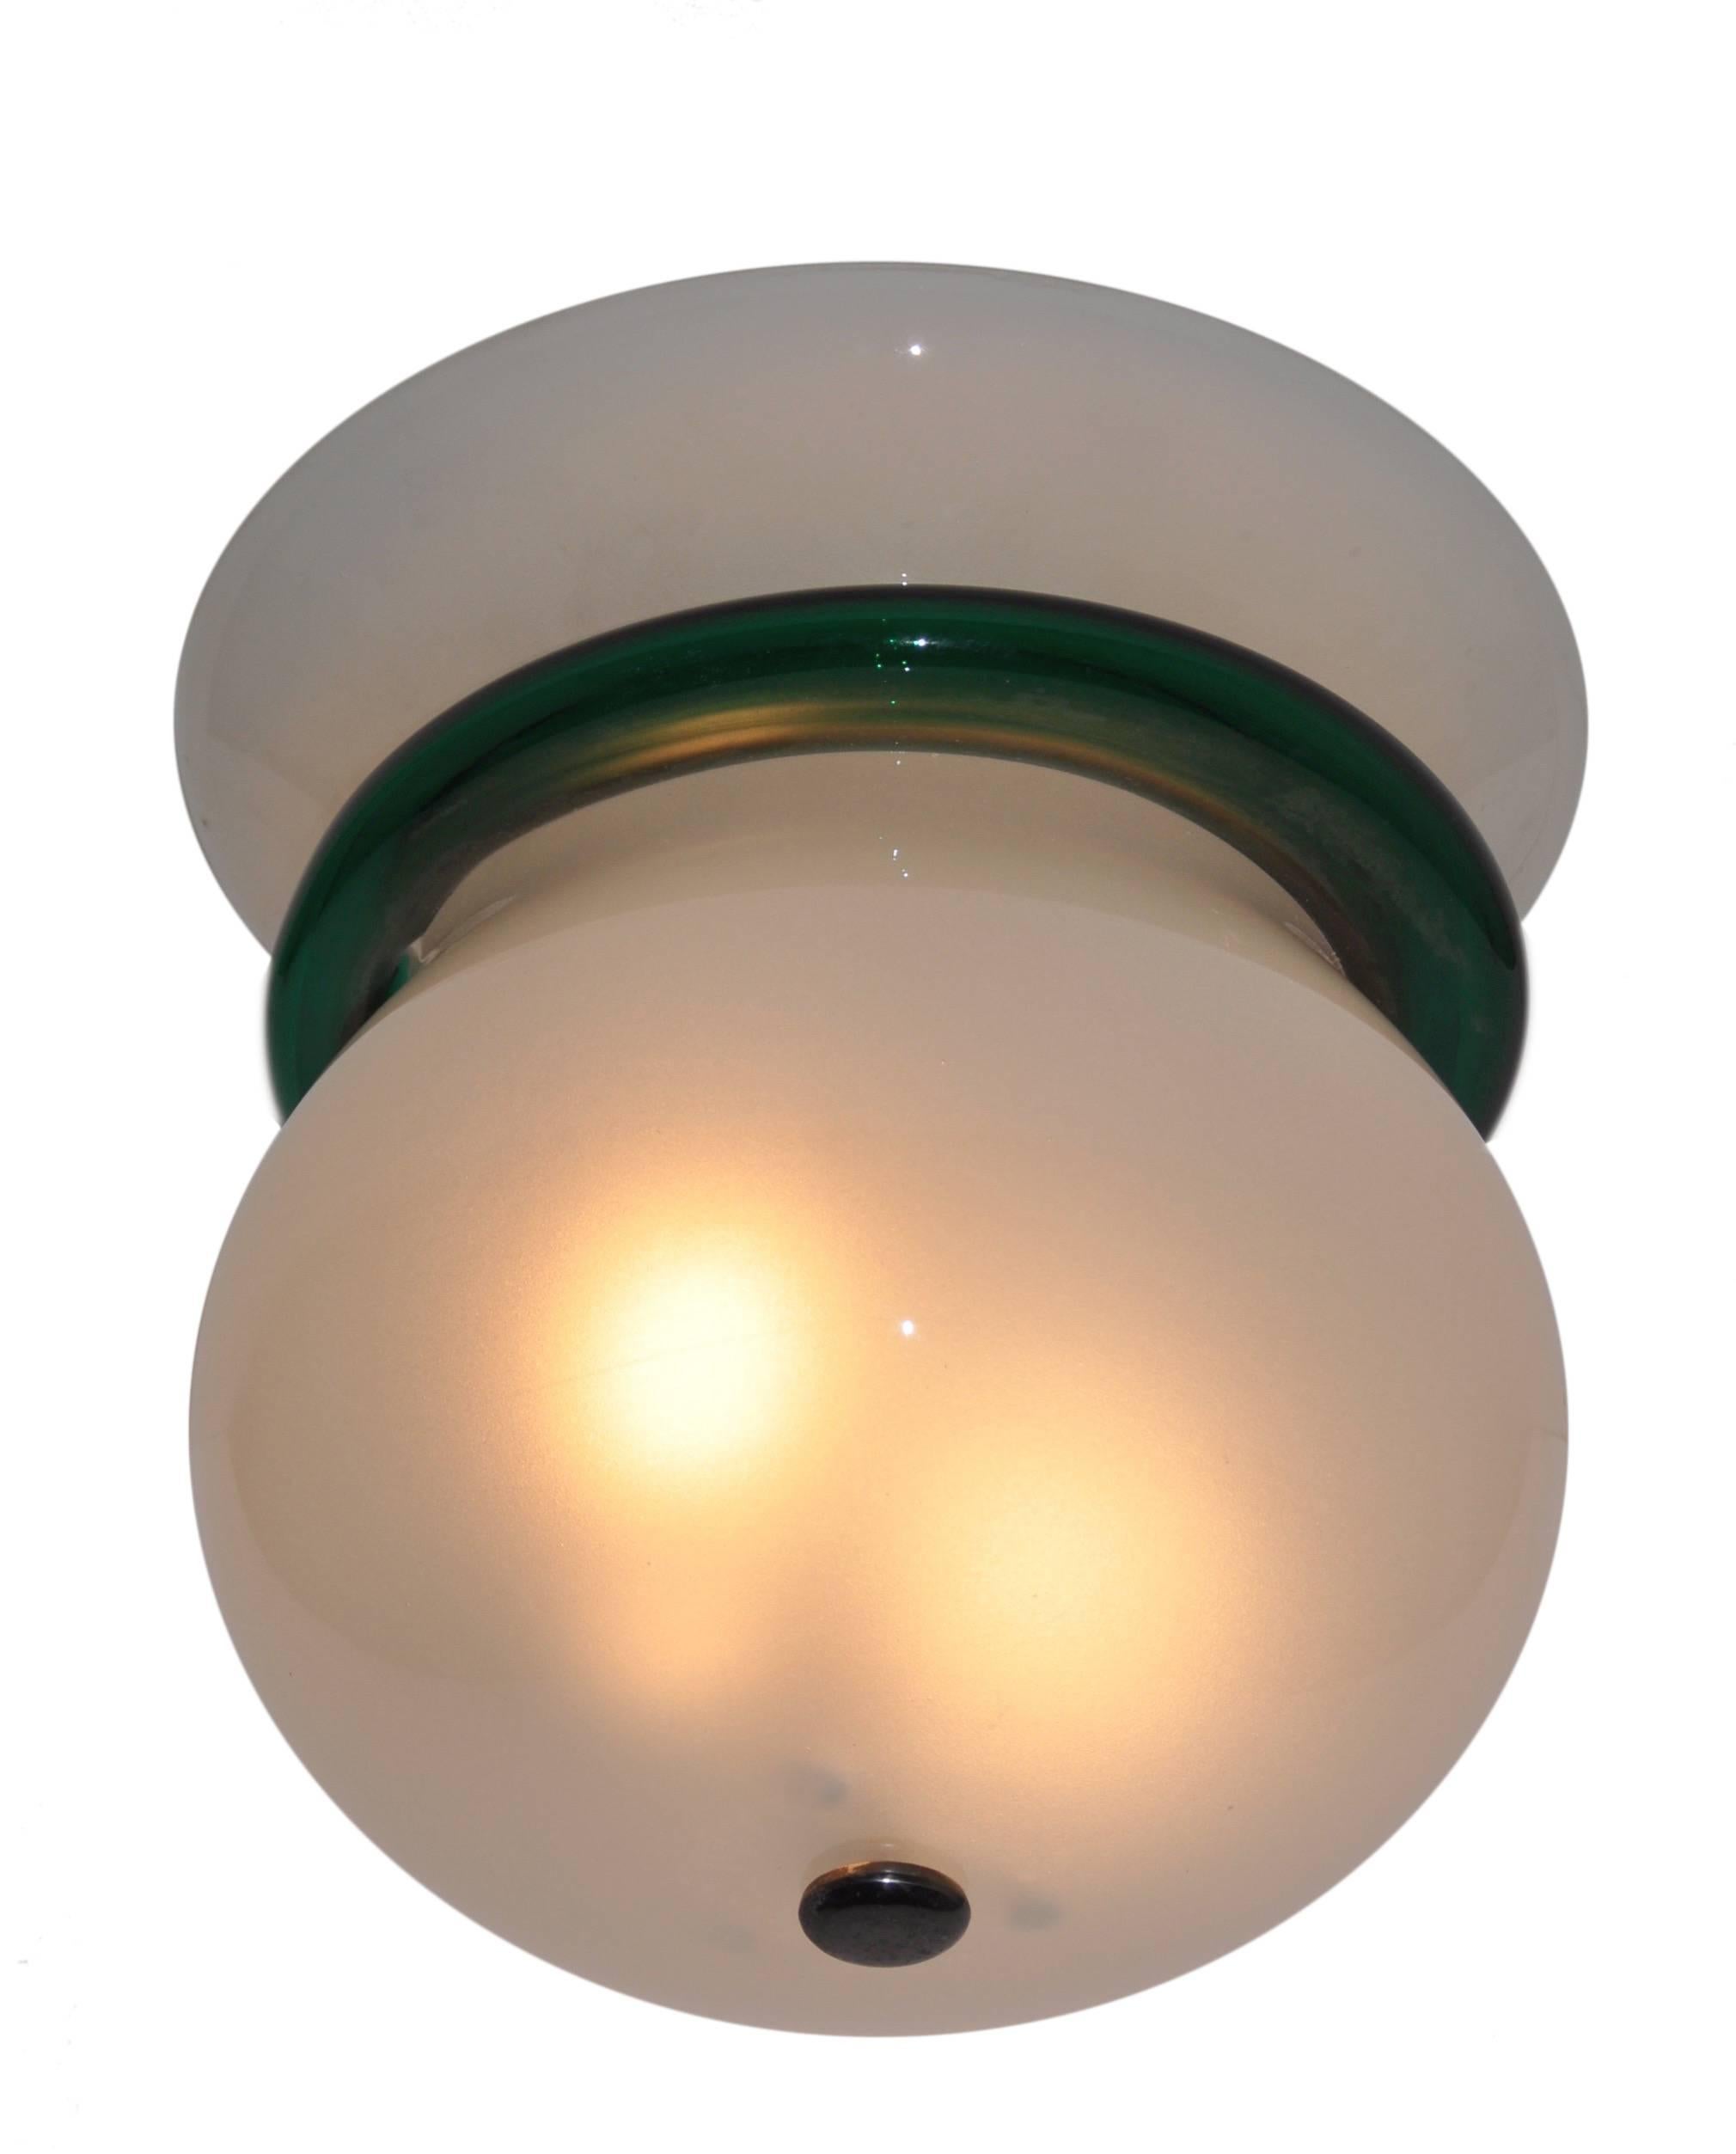 Internally frosted flush mount with a deep green melded band. The flush mount fits two E27 light bulbs. Original hardware.
Excellent condition with good trace of aged.